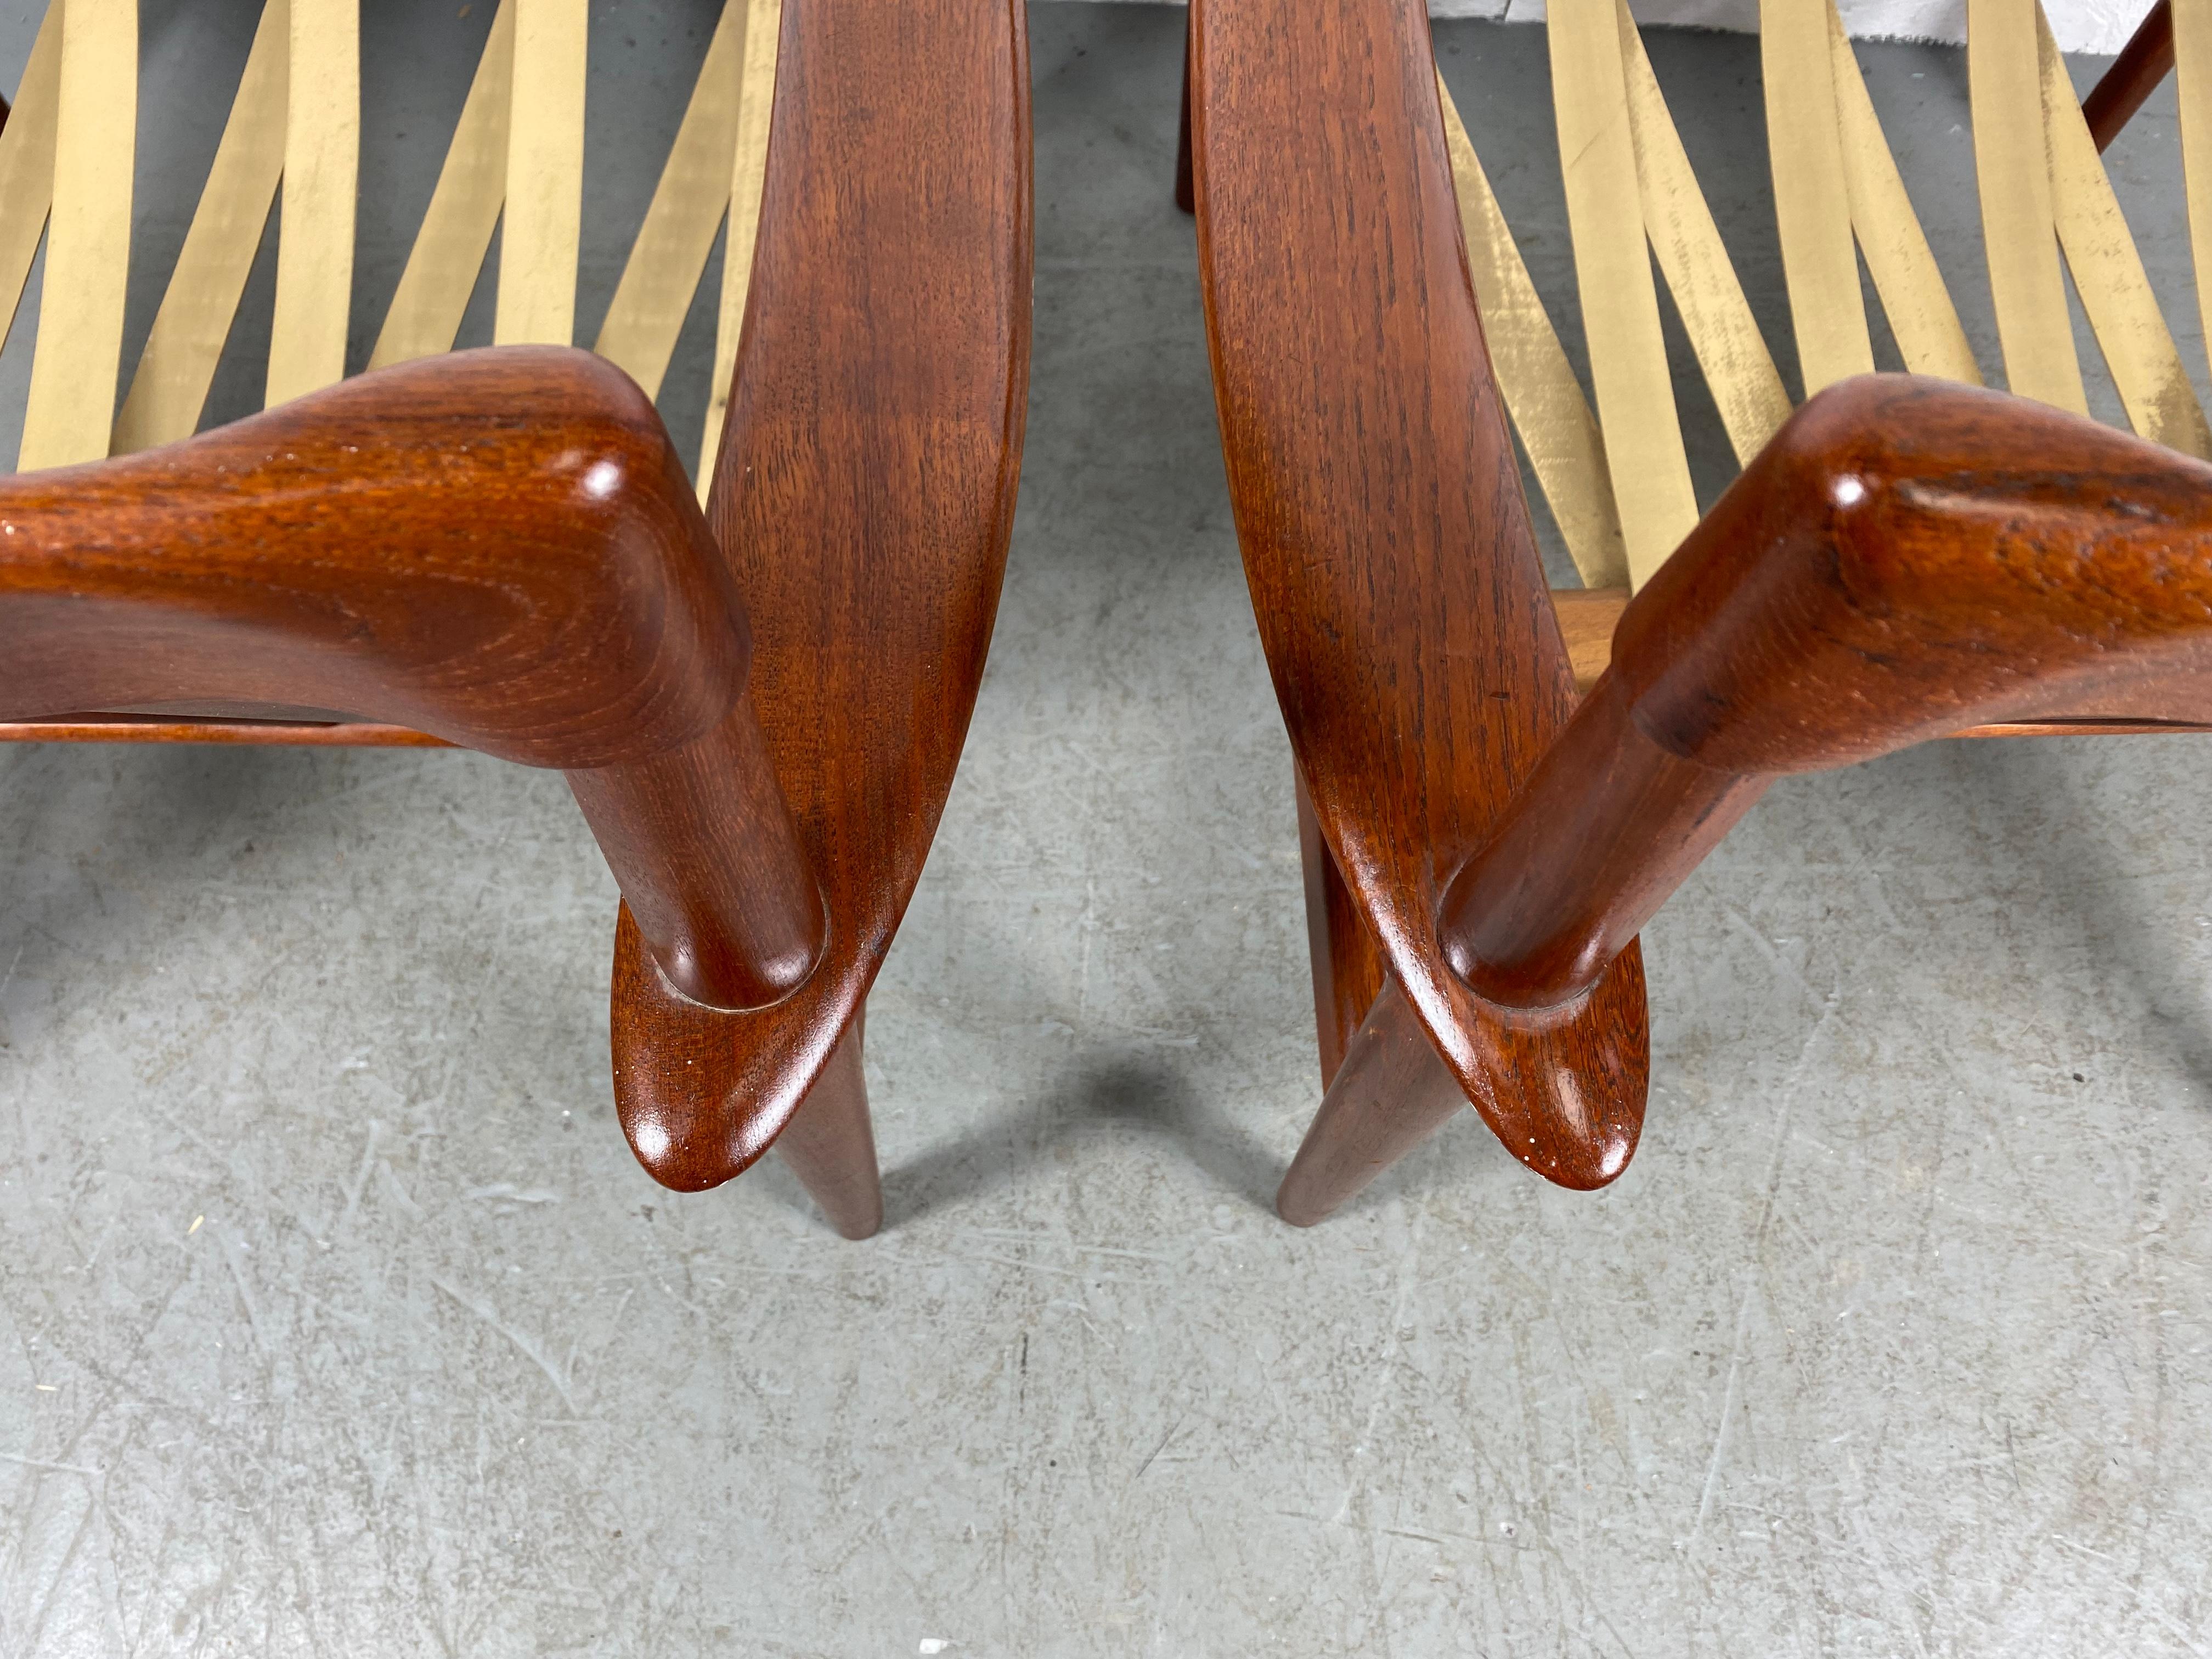 Classic Pair Teak Easy Chairs Designed by Grete Jalk, Made in Denmark 1